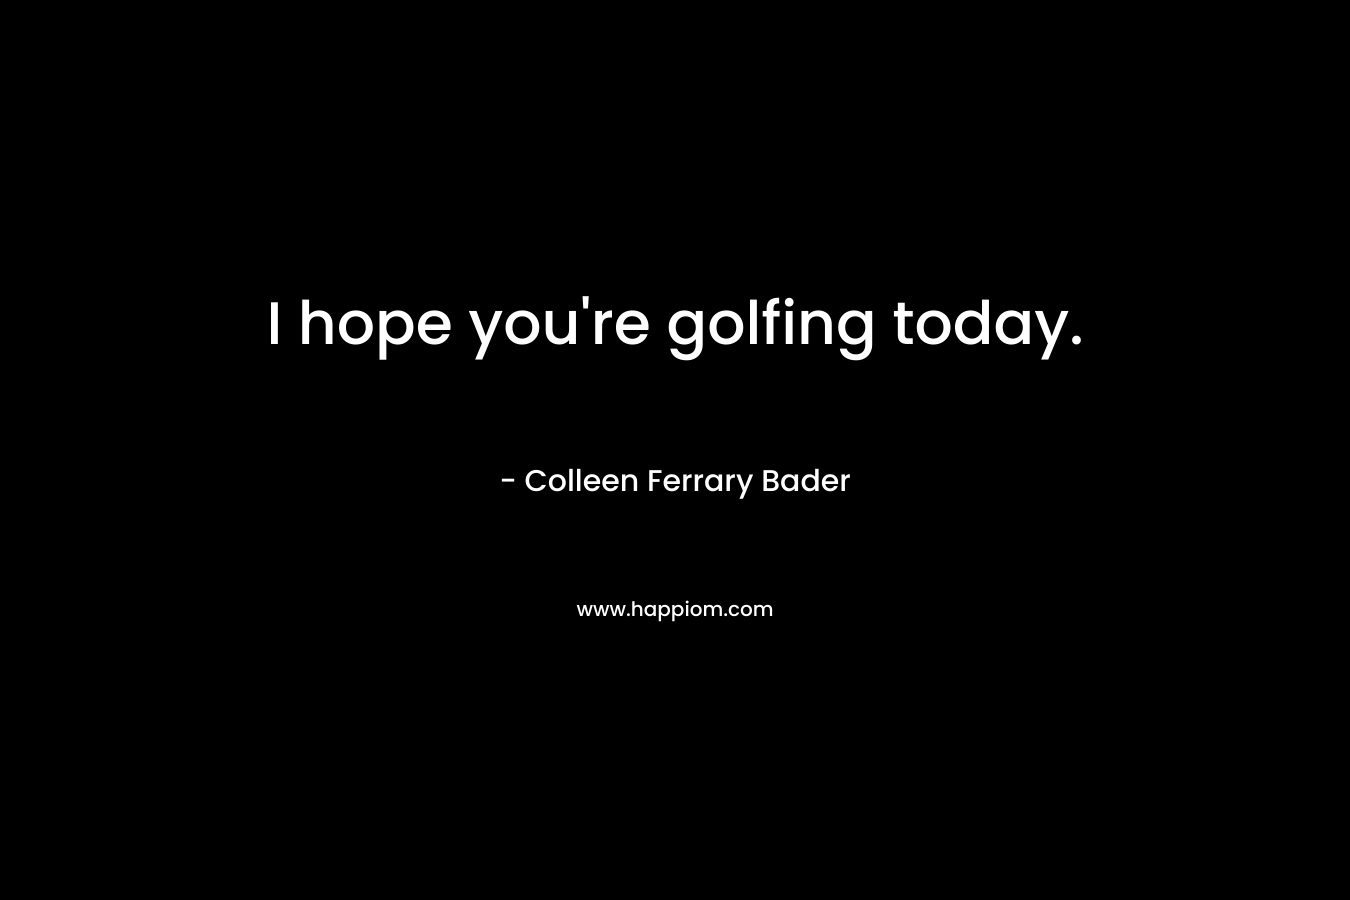 I hope you’re golfing today. – Colleen Ferrary Bader